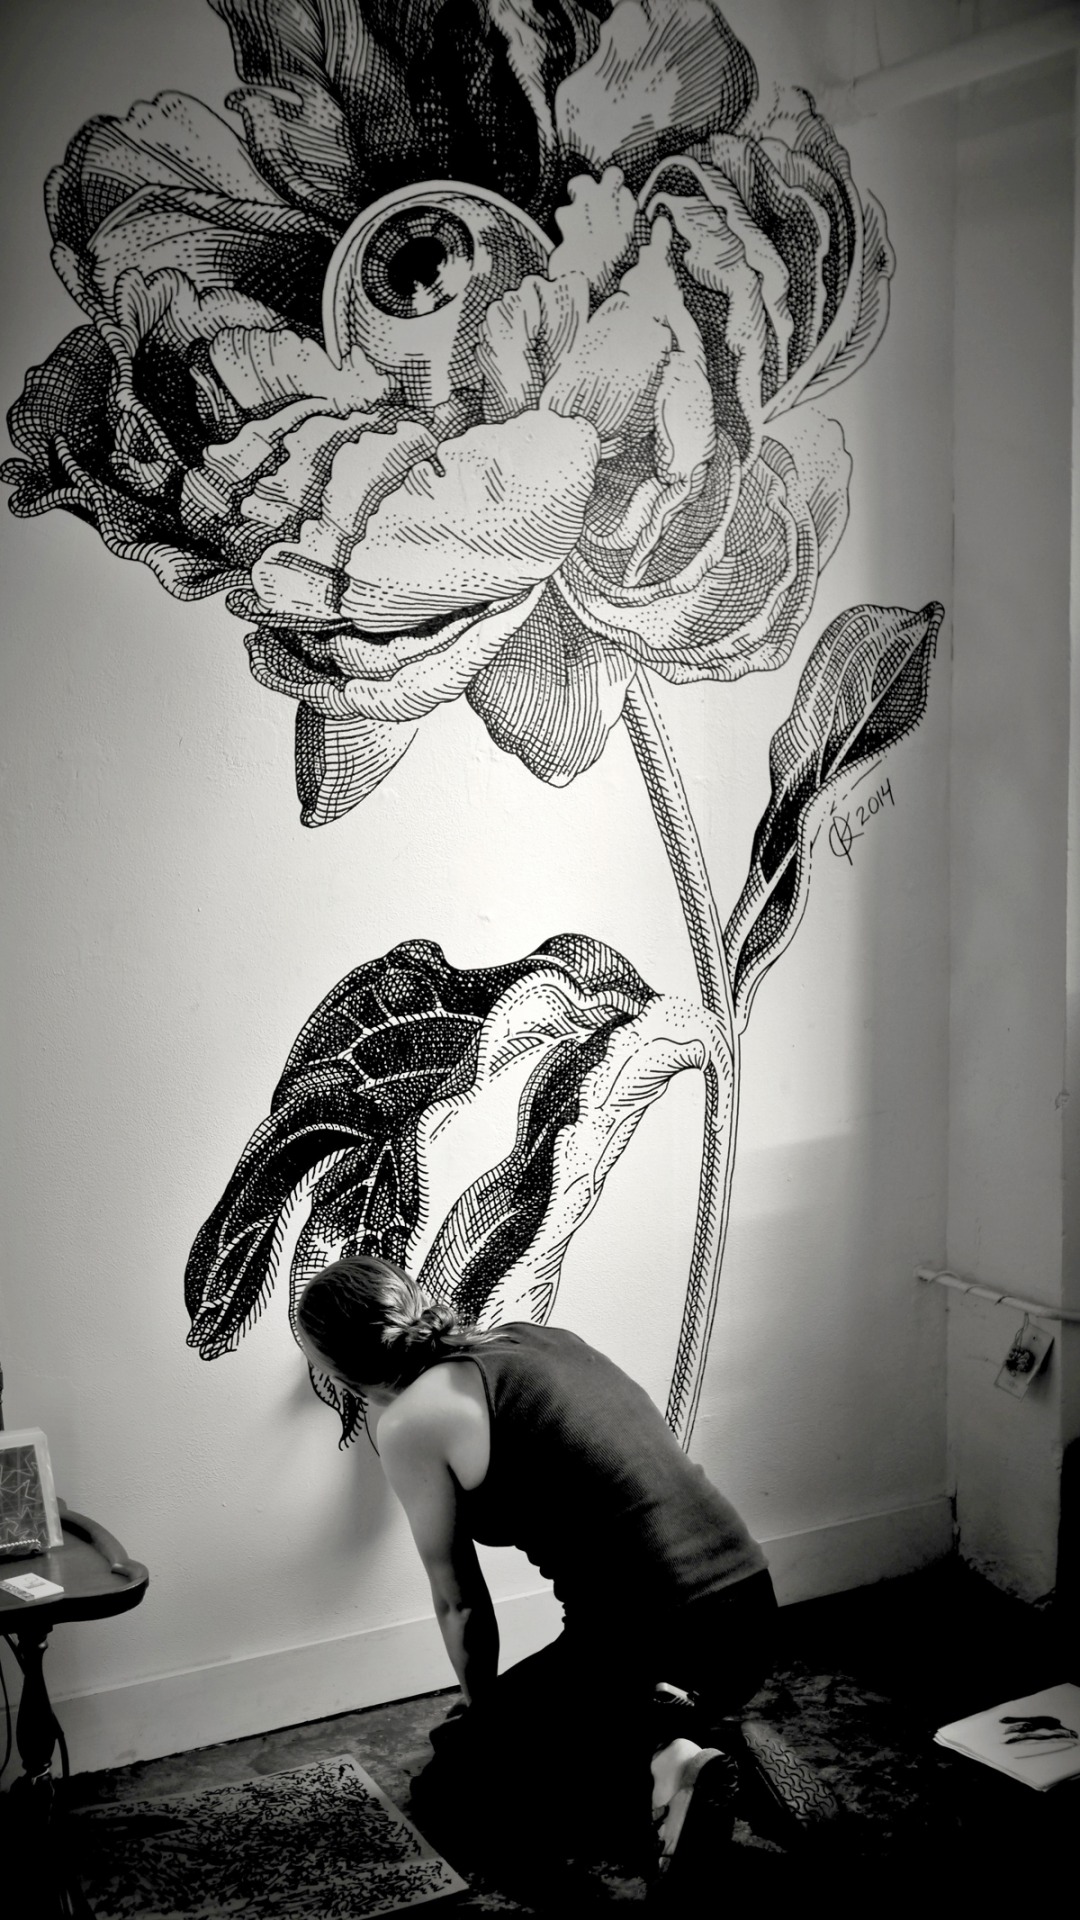 Amazing Cross-Hatched Drawings by Olivia Knapp #artpeople